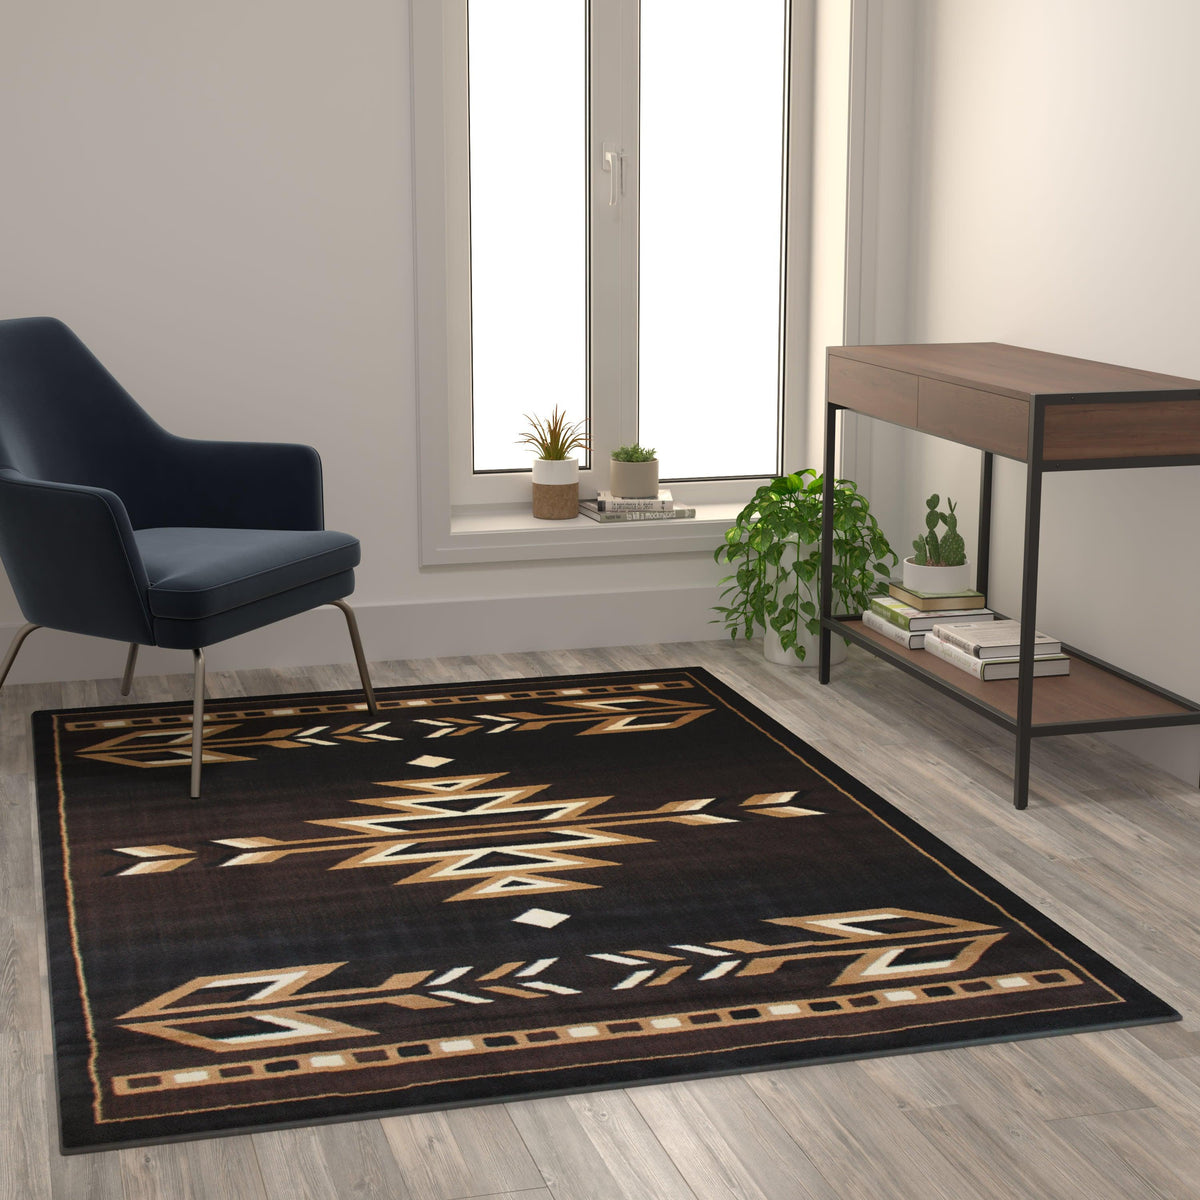 Brown,5' x 7' |#| Southwestern Style Area Rug in Shades of Brown, Beige, and Black - 5' x 7'